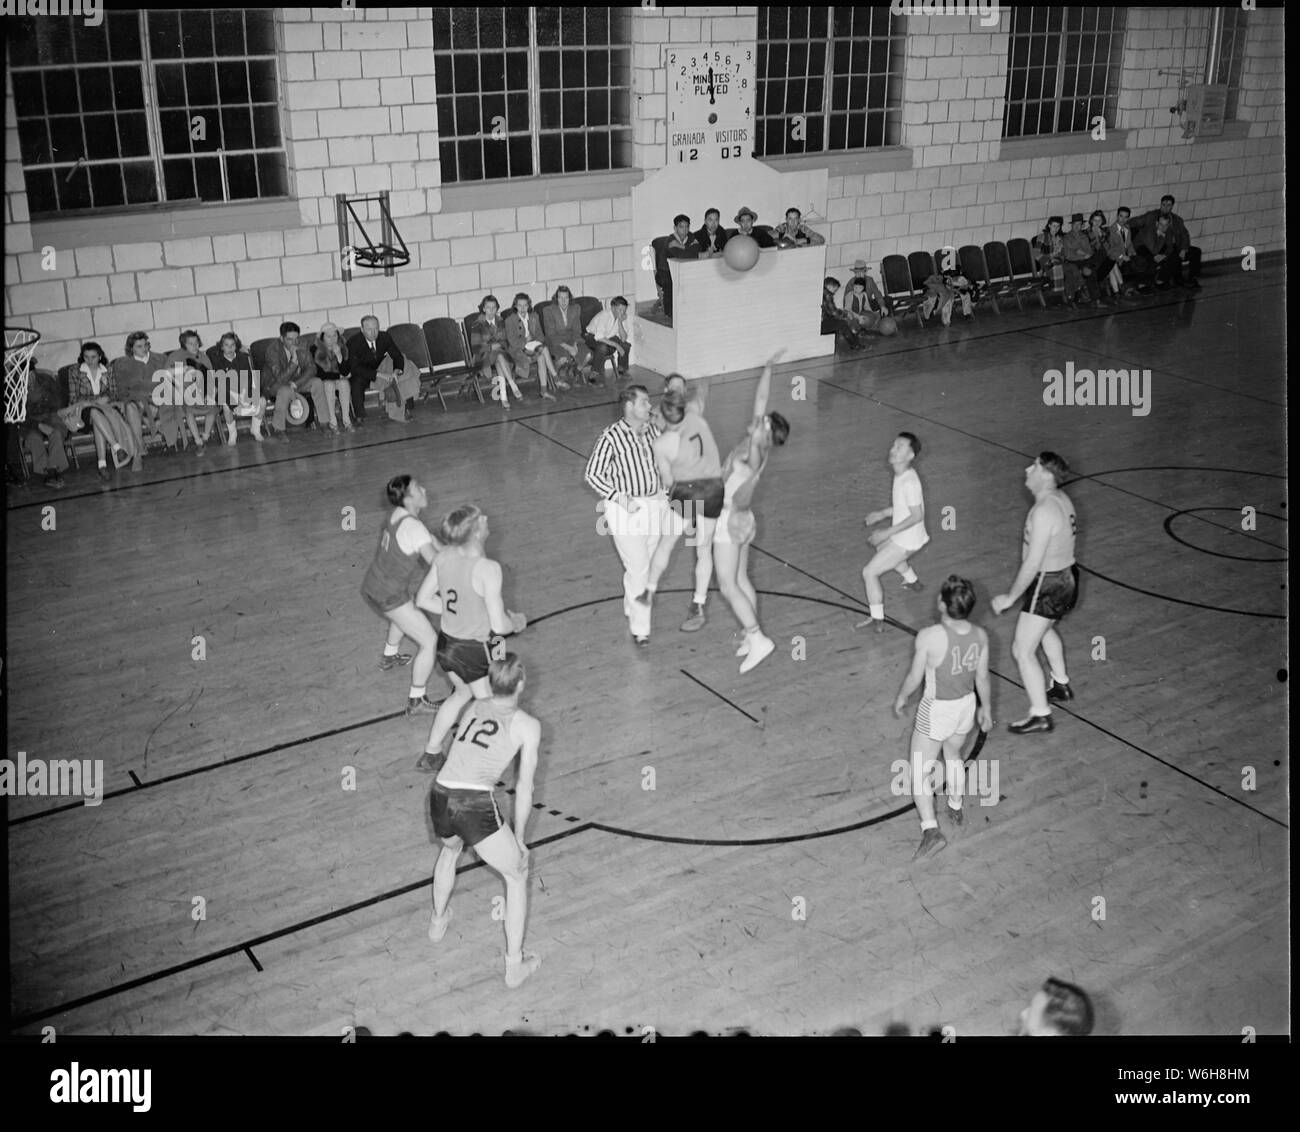 Granada Relocation Center, Amache, Colorado. A hotly contested basket ball  game between the Granada . . .; Scope and content: The full caption for  this photograph reads: Granada Relocation Center, Amache, Colorado.